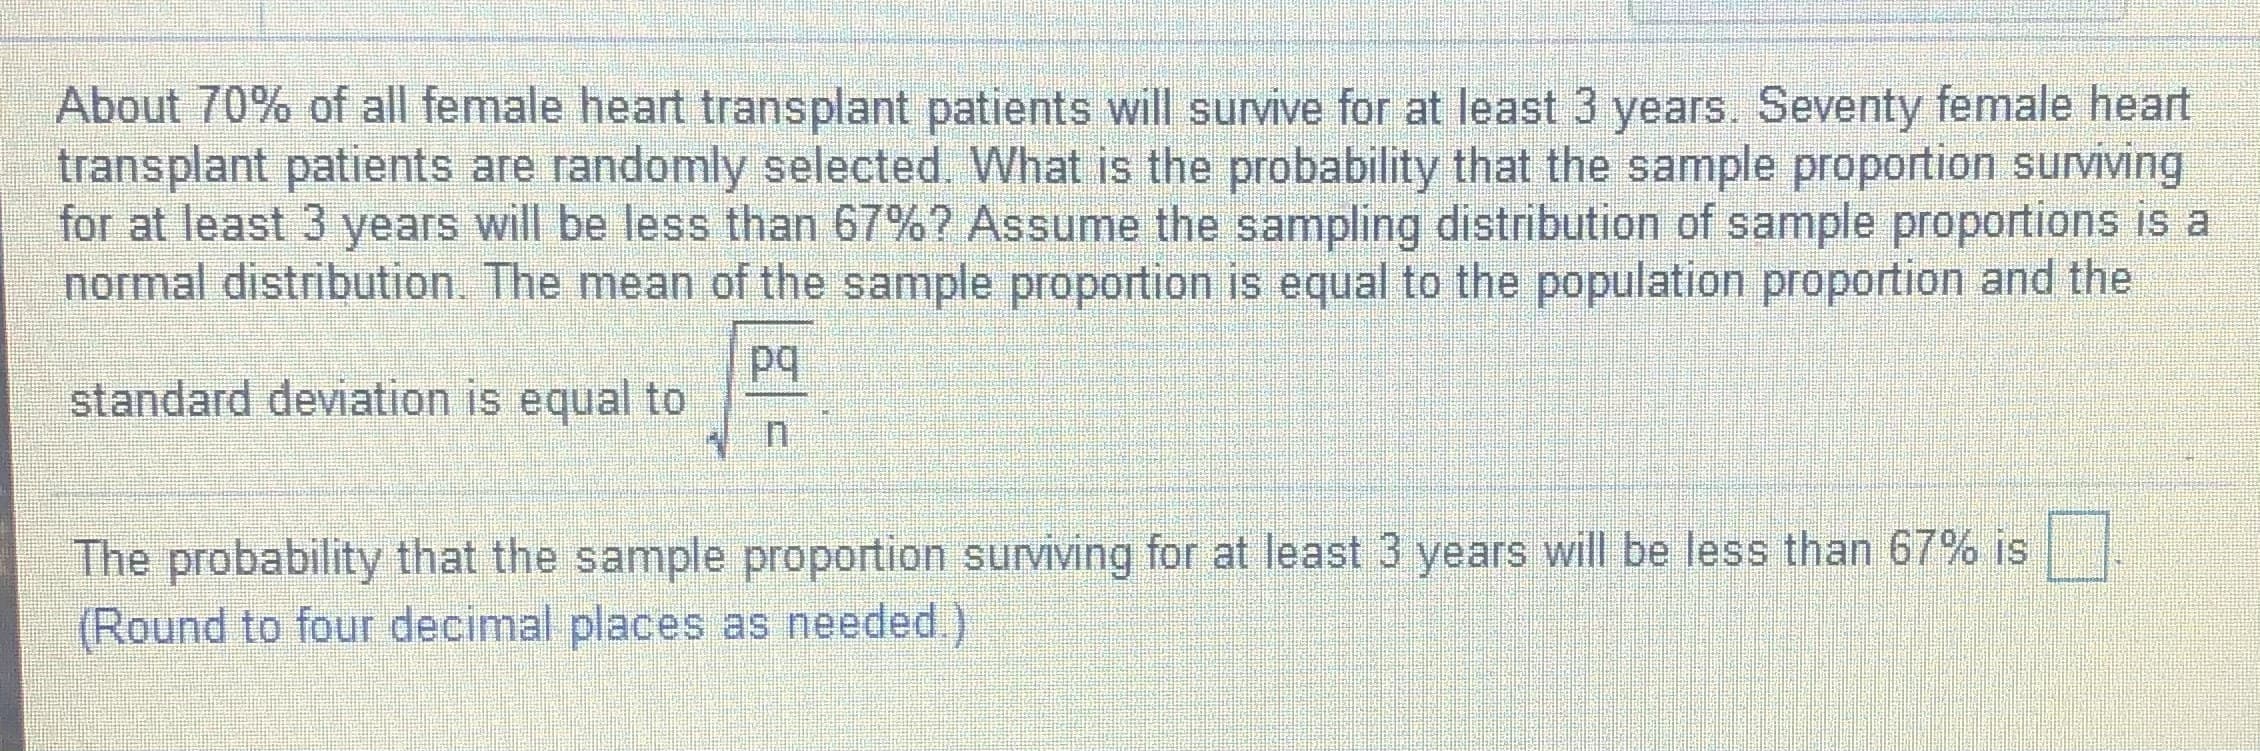 About 70% of all female heart transplant patients will survive for at least 3 years. Seventy female heart
transplant patients are randomly selected. What is the probability that the sample proportion surviving
for at least 3 years will be less than 67%? Assume the sampling distribution of sample proportions is a
normal distribution. The mean of the sample proportion is equal to the population proportion and the
standard deviation is equal to
The probability that the sample proportion surviving for at least 3 years will be less than 67% is
